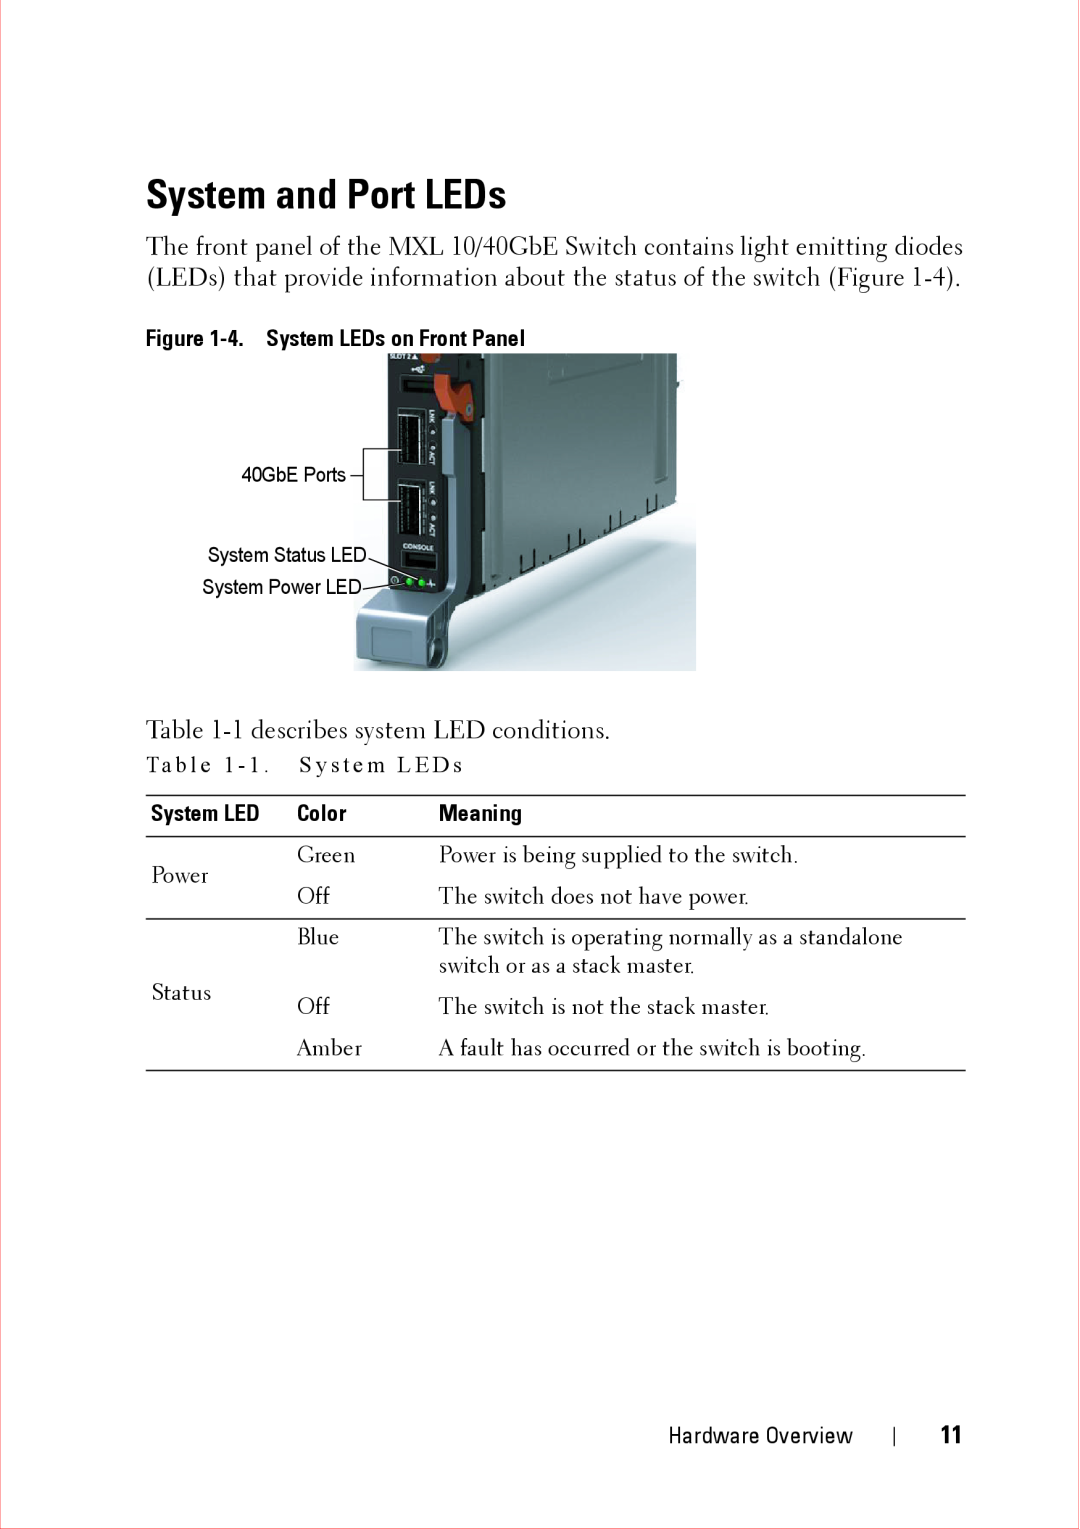 Force10 Networks CC-C-BLNK-LC manual System and Port LEDs, 4. System LEDs on Front Panel, Color, Meaning 